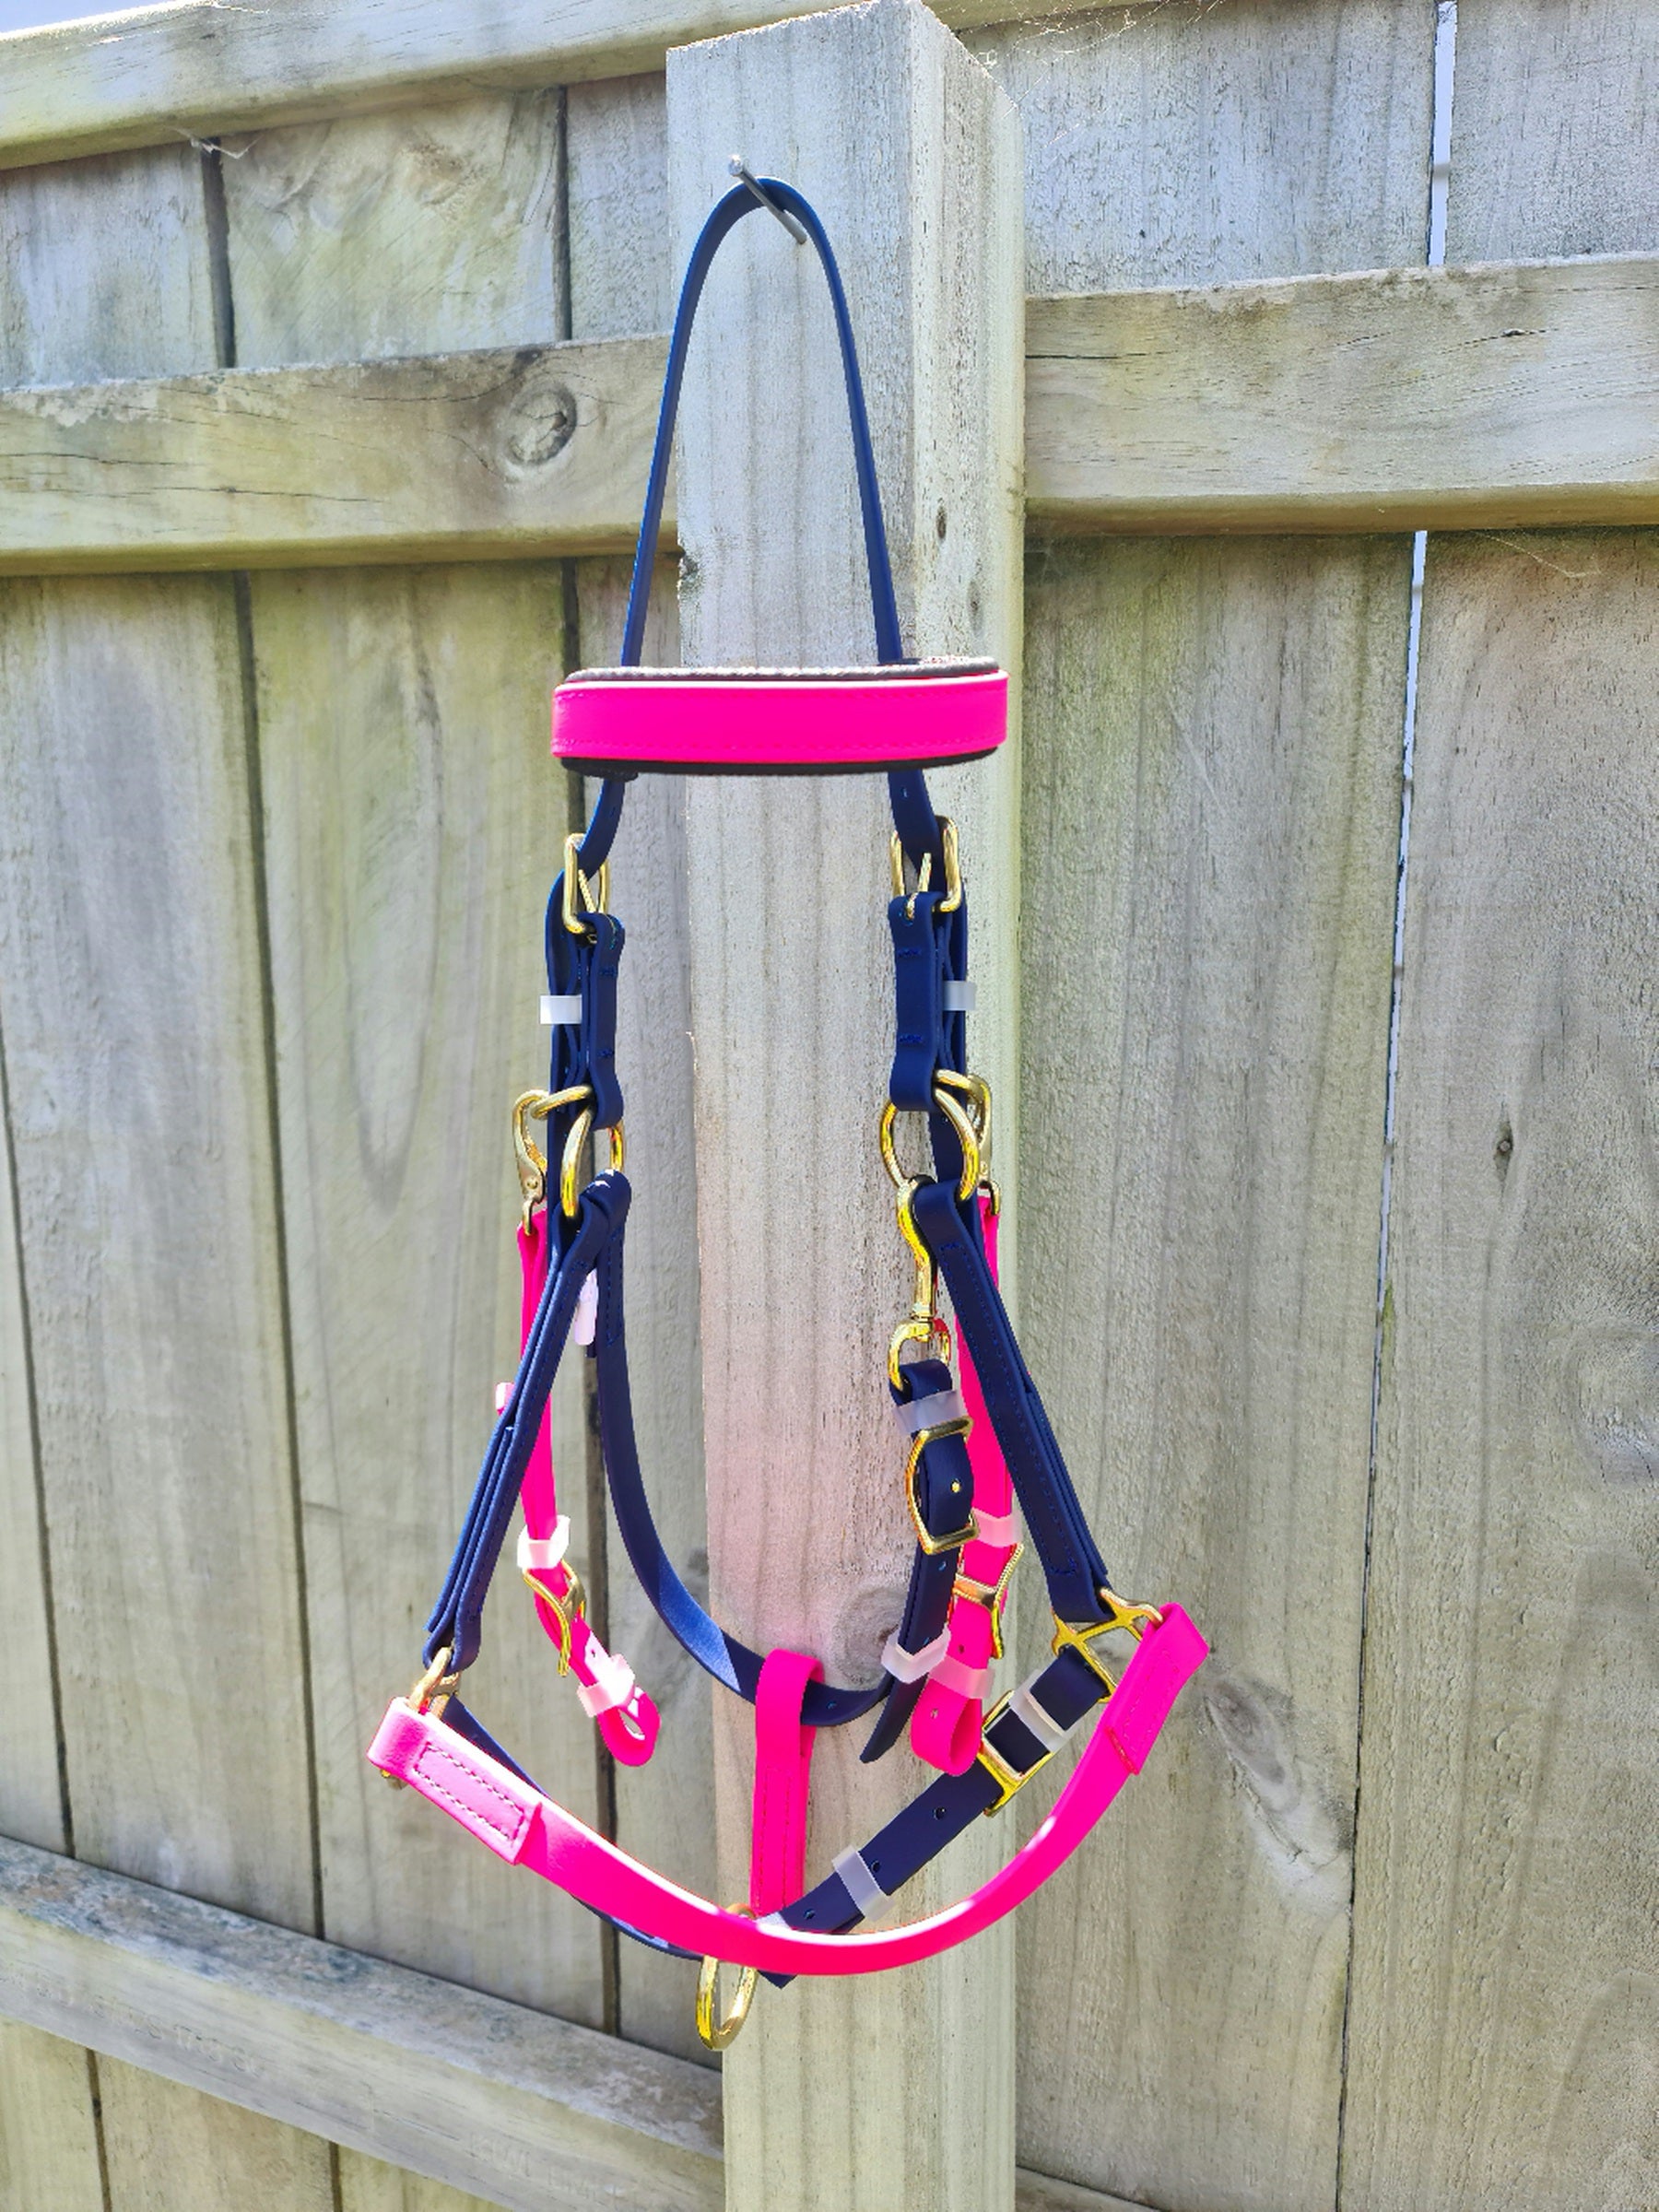 A LS Equestrian Bridle - Halter Bridle Navy & Pink, featuring gold-colored hardware, hangs on a wooden fence post. The weathered fence, with its visible grain patterns, contrasts beautifully with the new and neatly arranged halter. Nearby, endurance bridles hint at the rider's preparation for long trails.